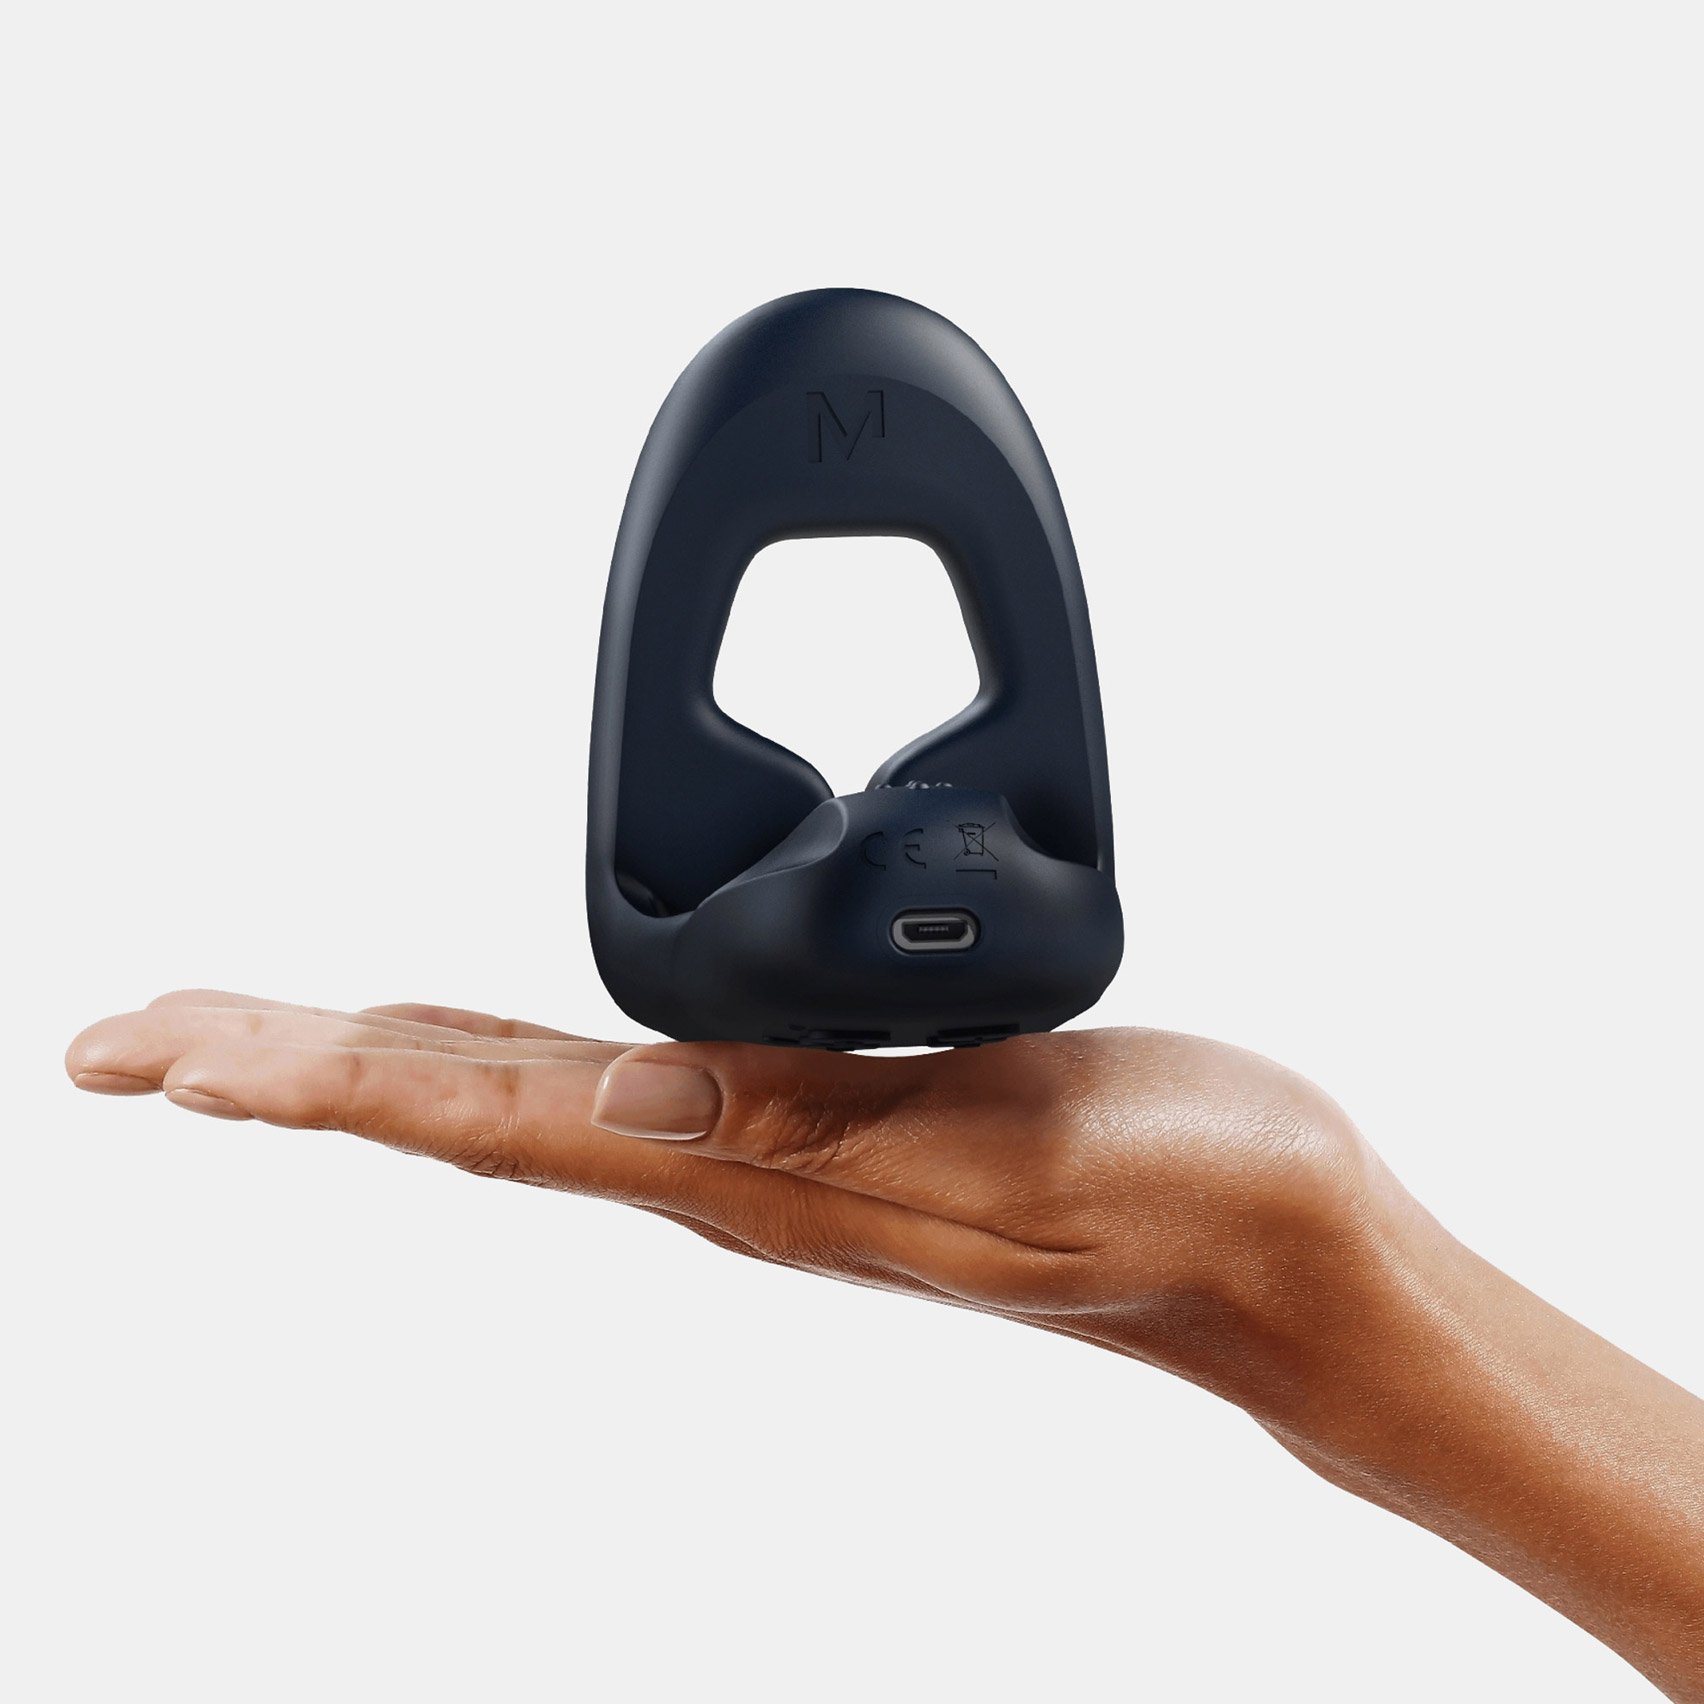 Tenuto 2 is a wearable vibrator designed to tackle erectile dysfunction image